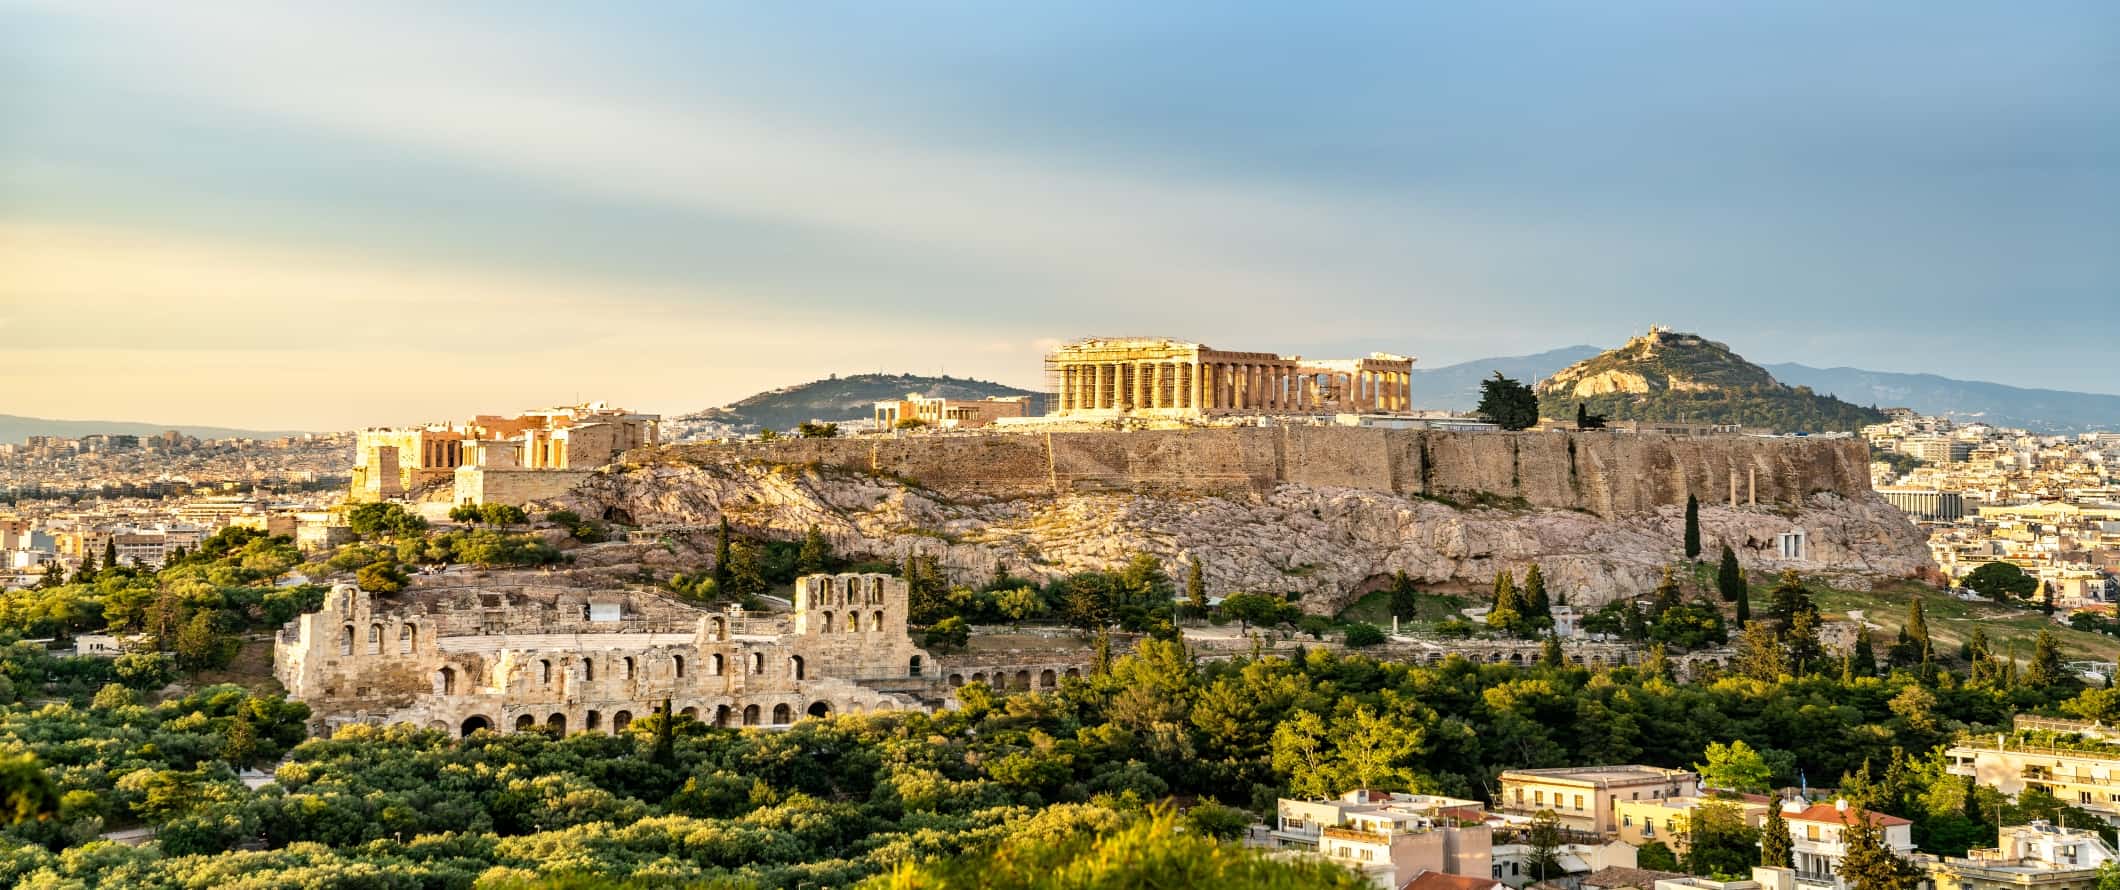 Athens Travel Guide: All You Need To Know Before Visiting Athens